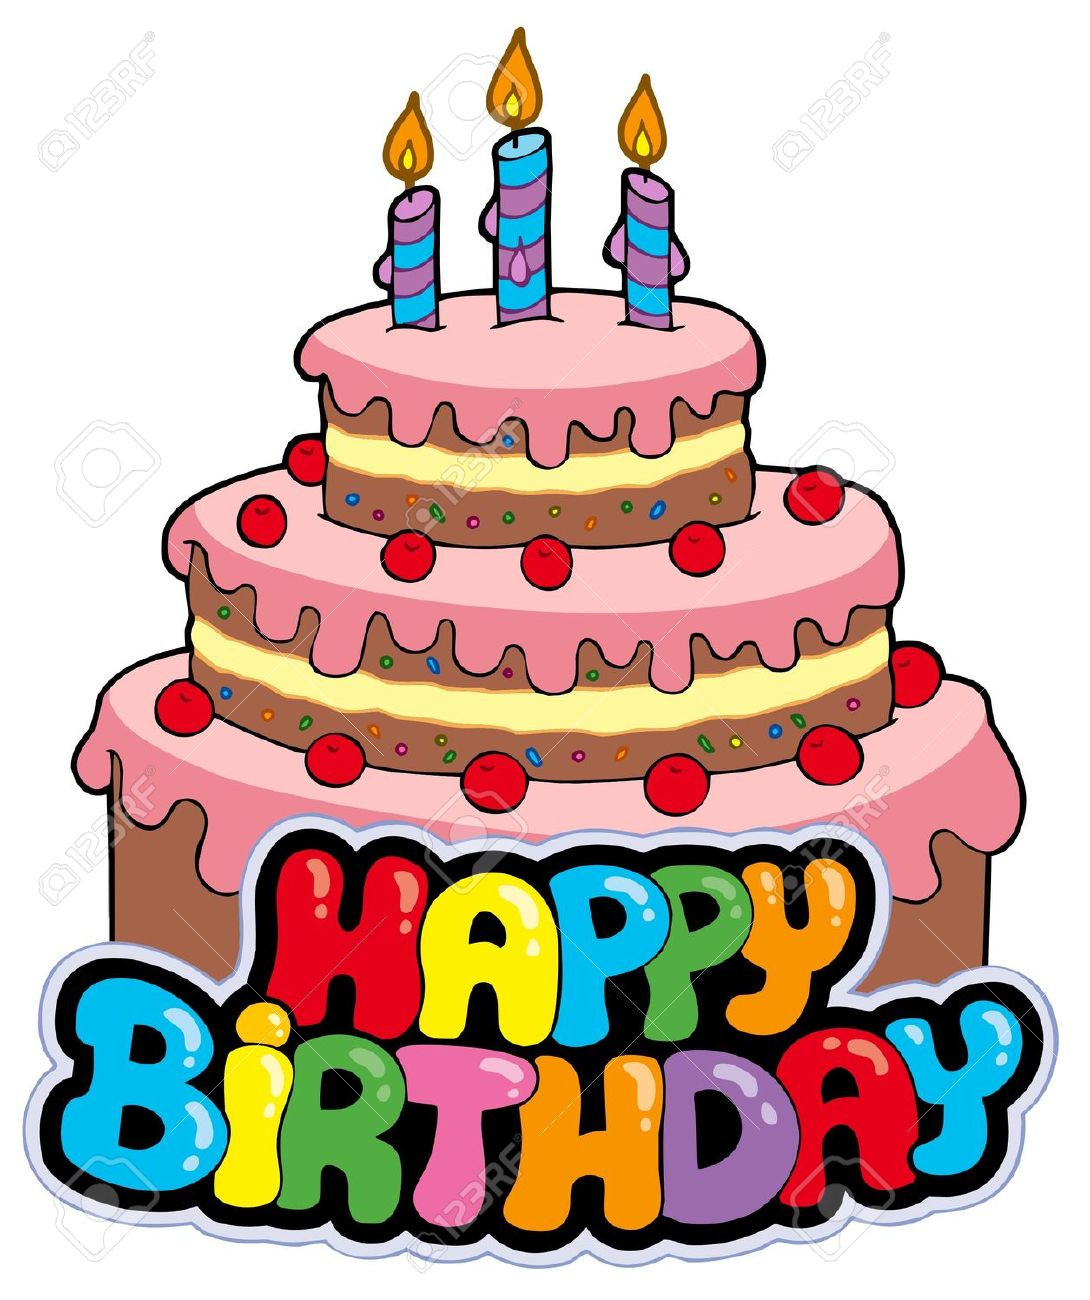 Best ideas about Happy Birthday Cake Clipart
. Save or Pin Birthday cake arrange clipart image 3686 Now.